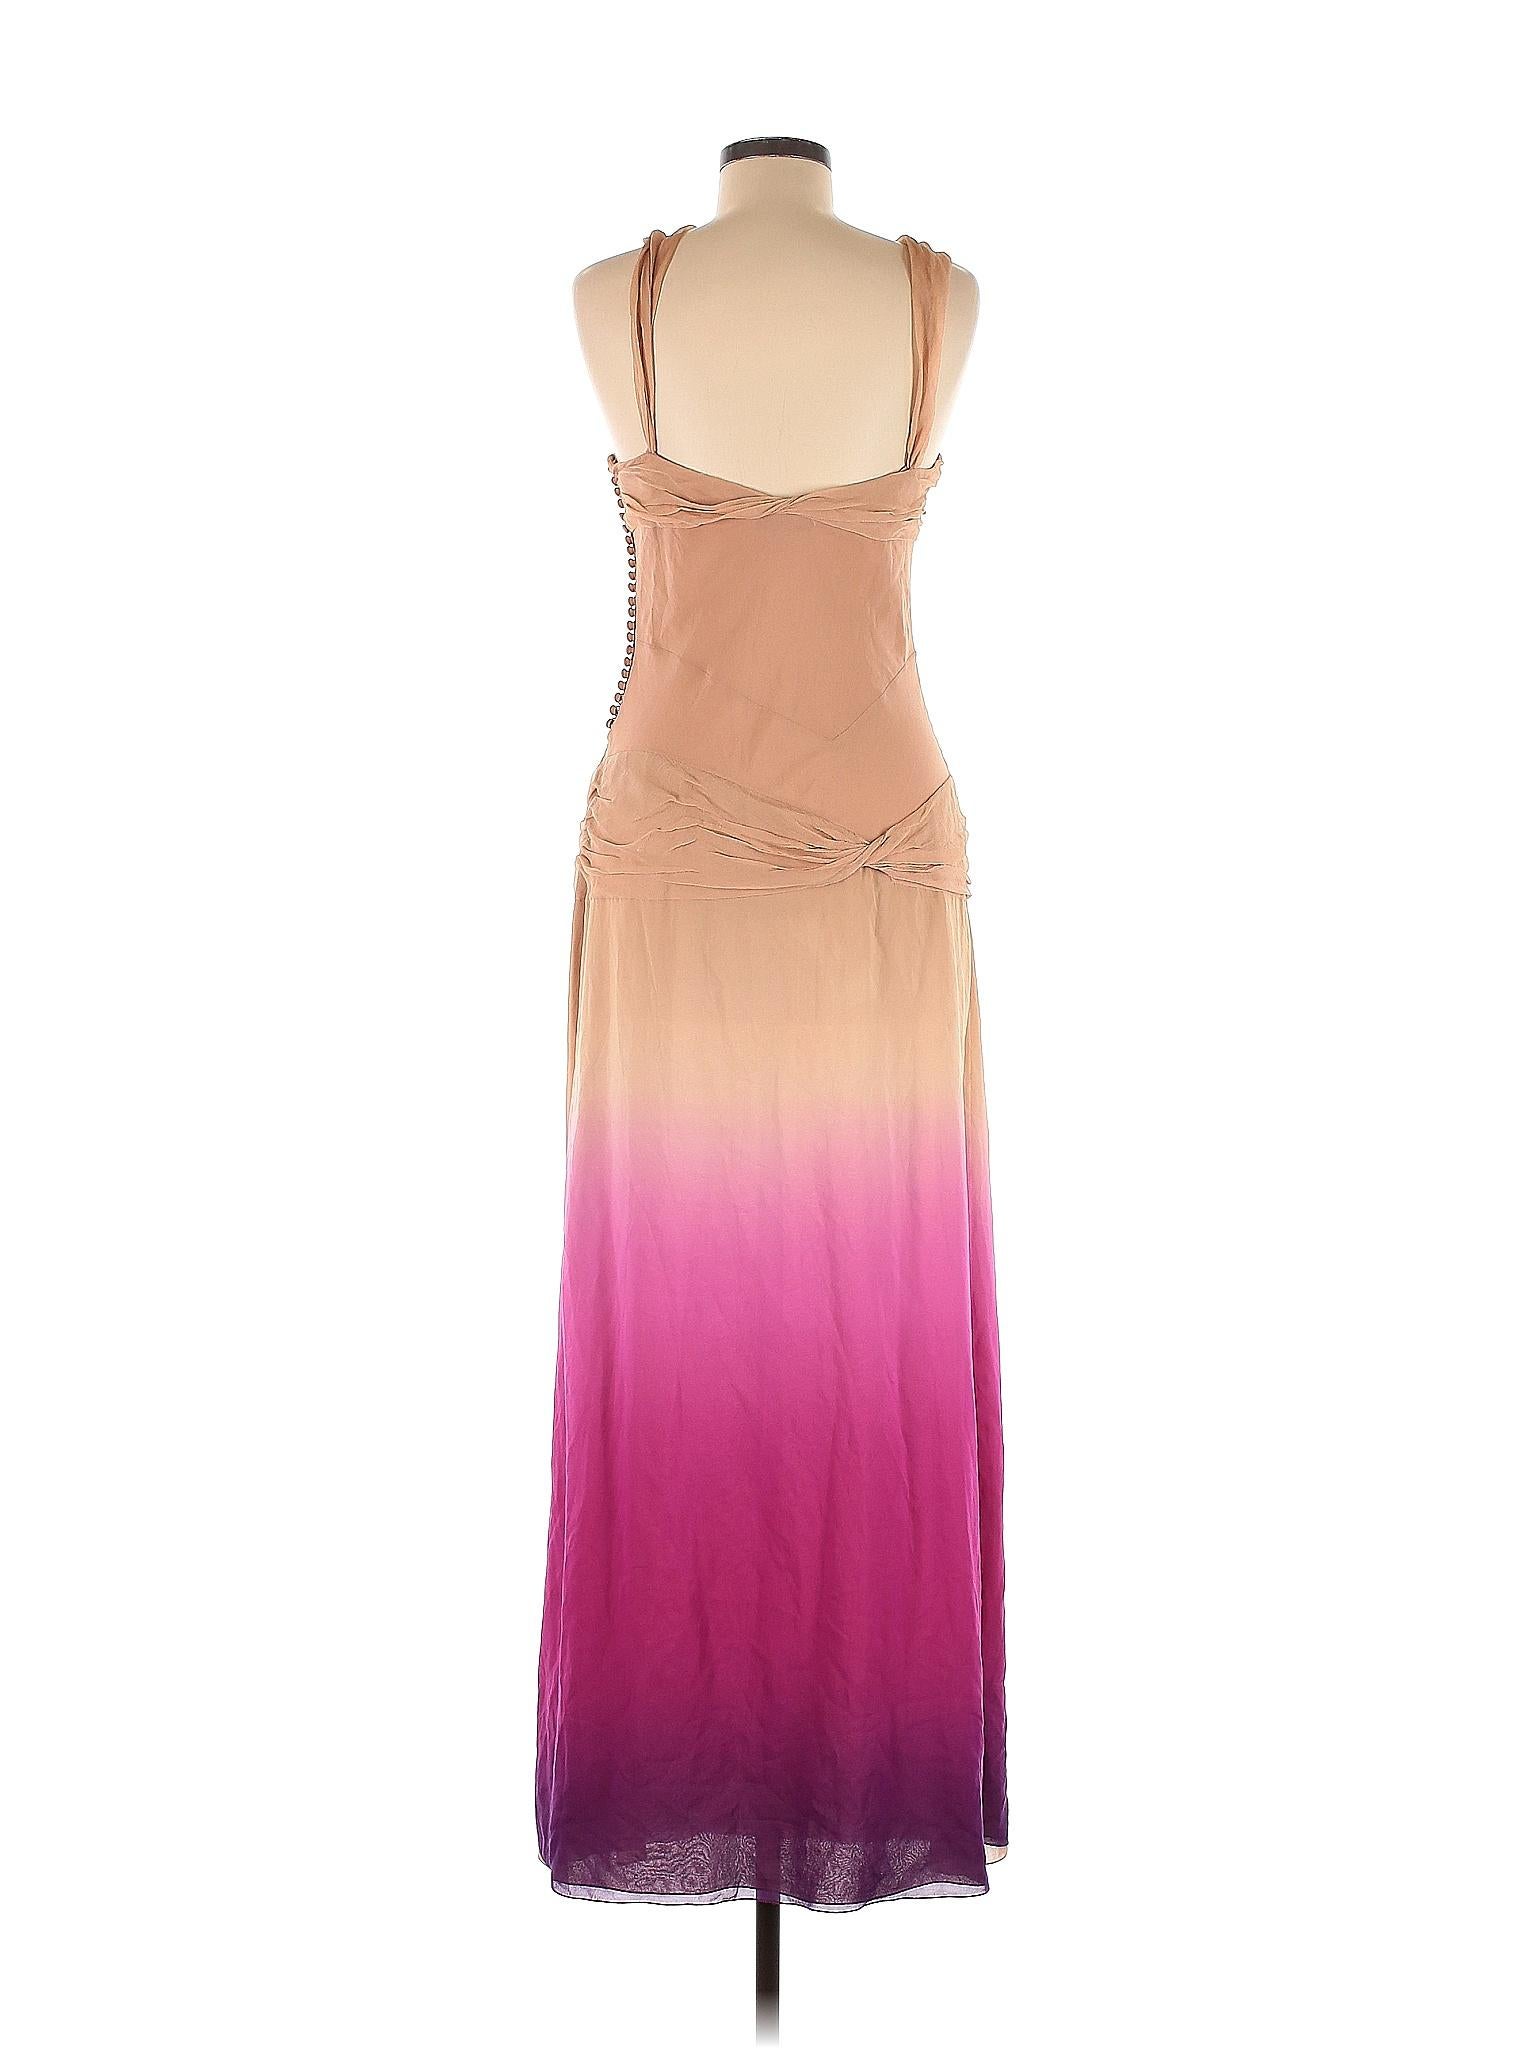 2006 Vintage John Galliano for Christian Dior Silk Gown
Chiffon
Fully lined
Size: US - 8
Made in France
Excellent condition